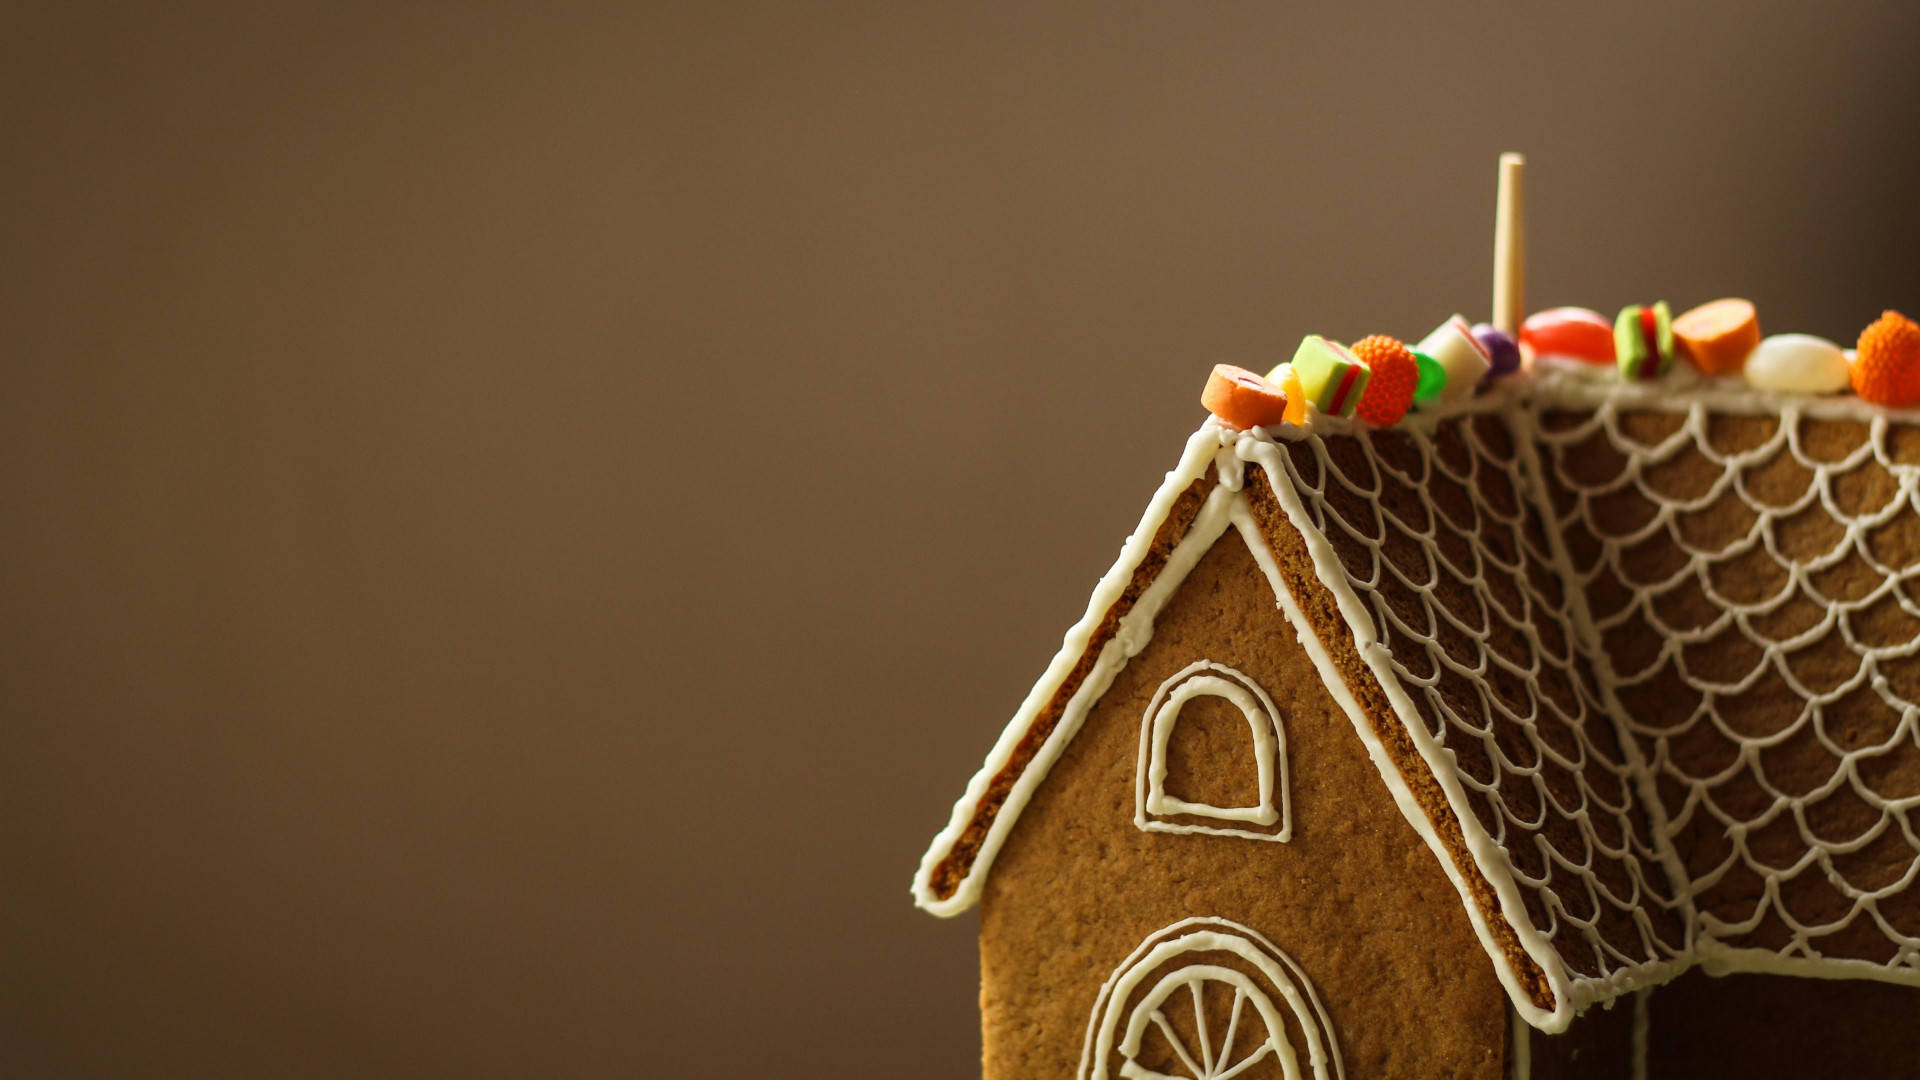 Cathedral Gingerbread House Design Background